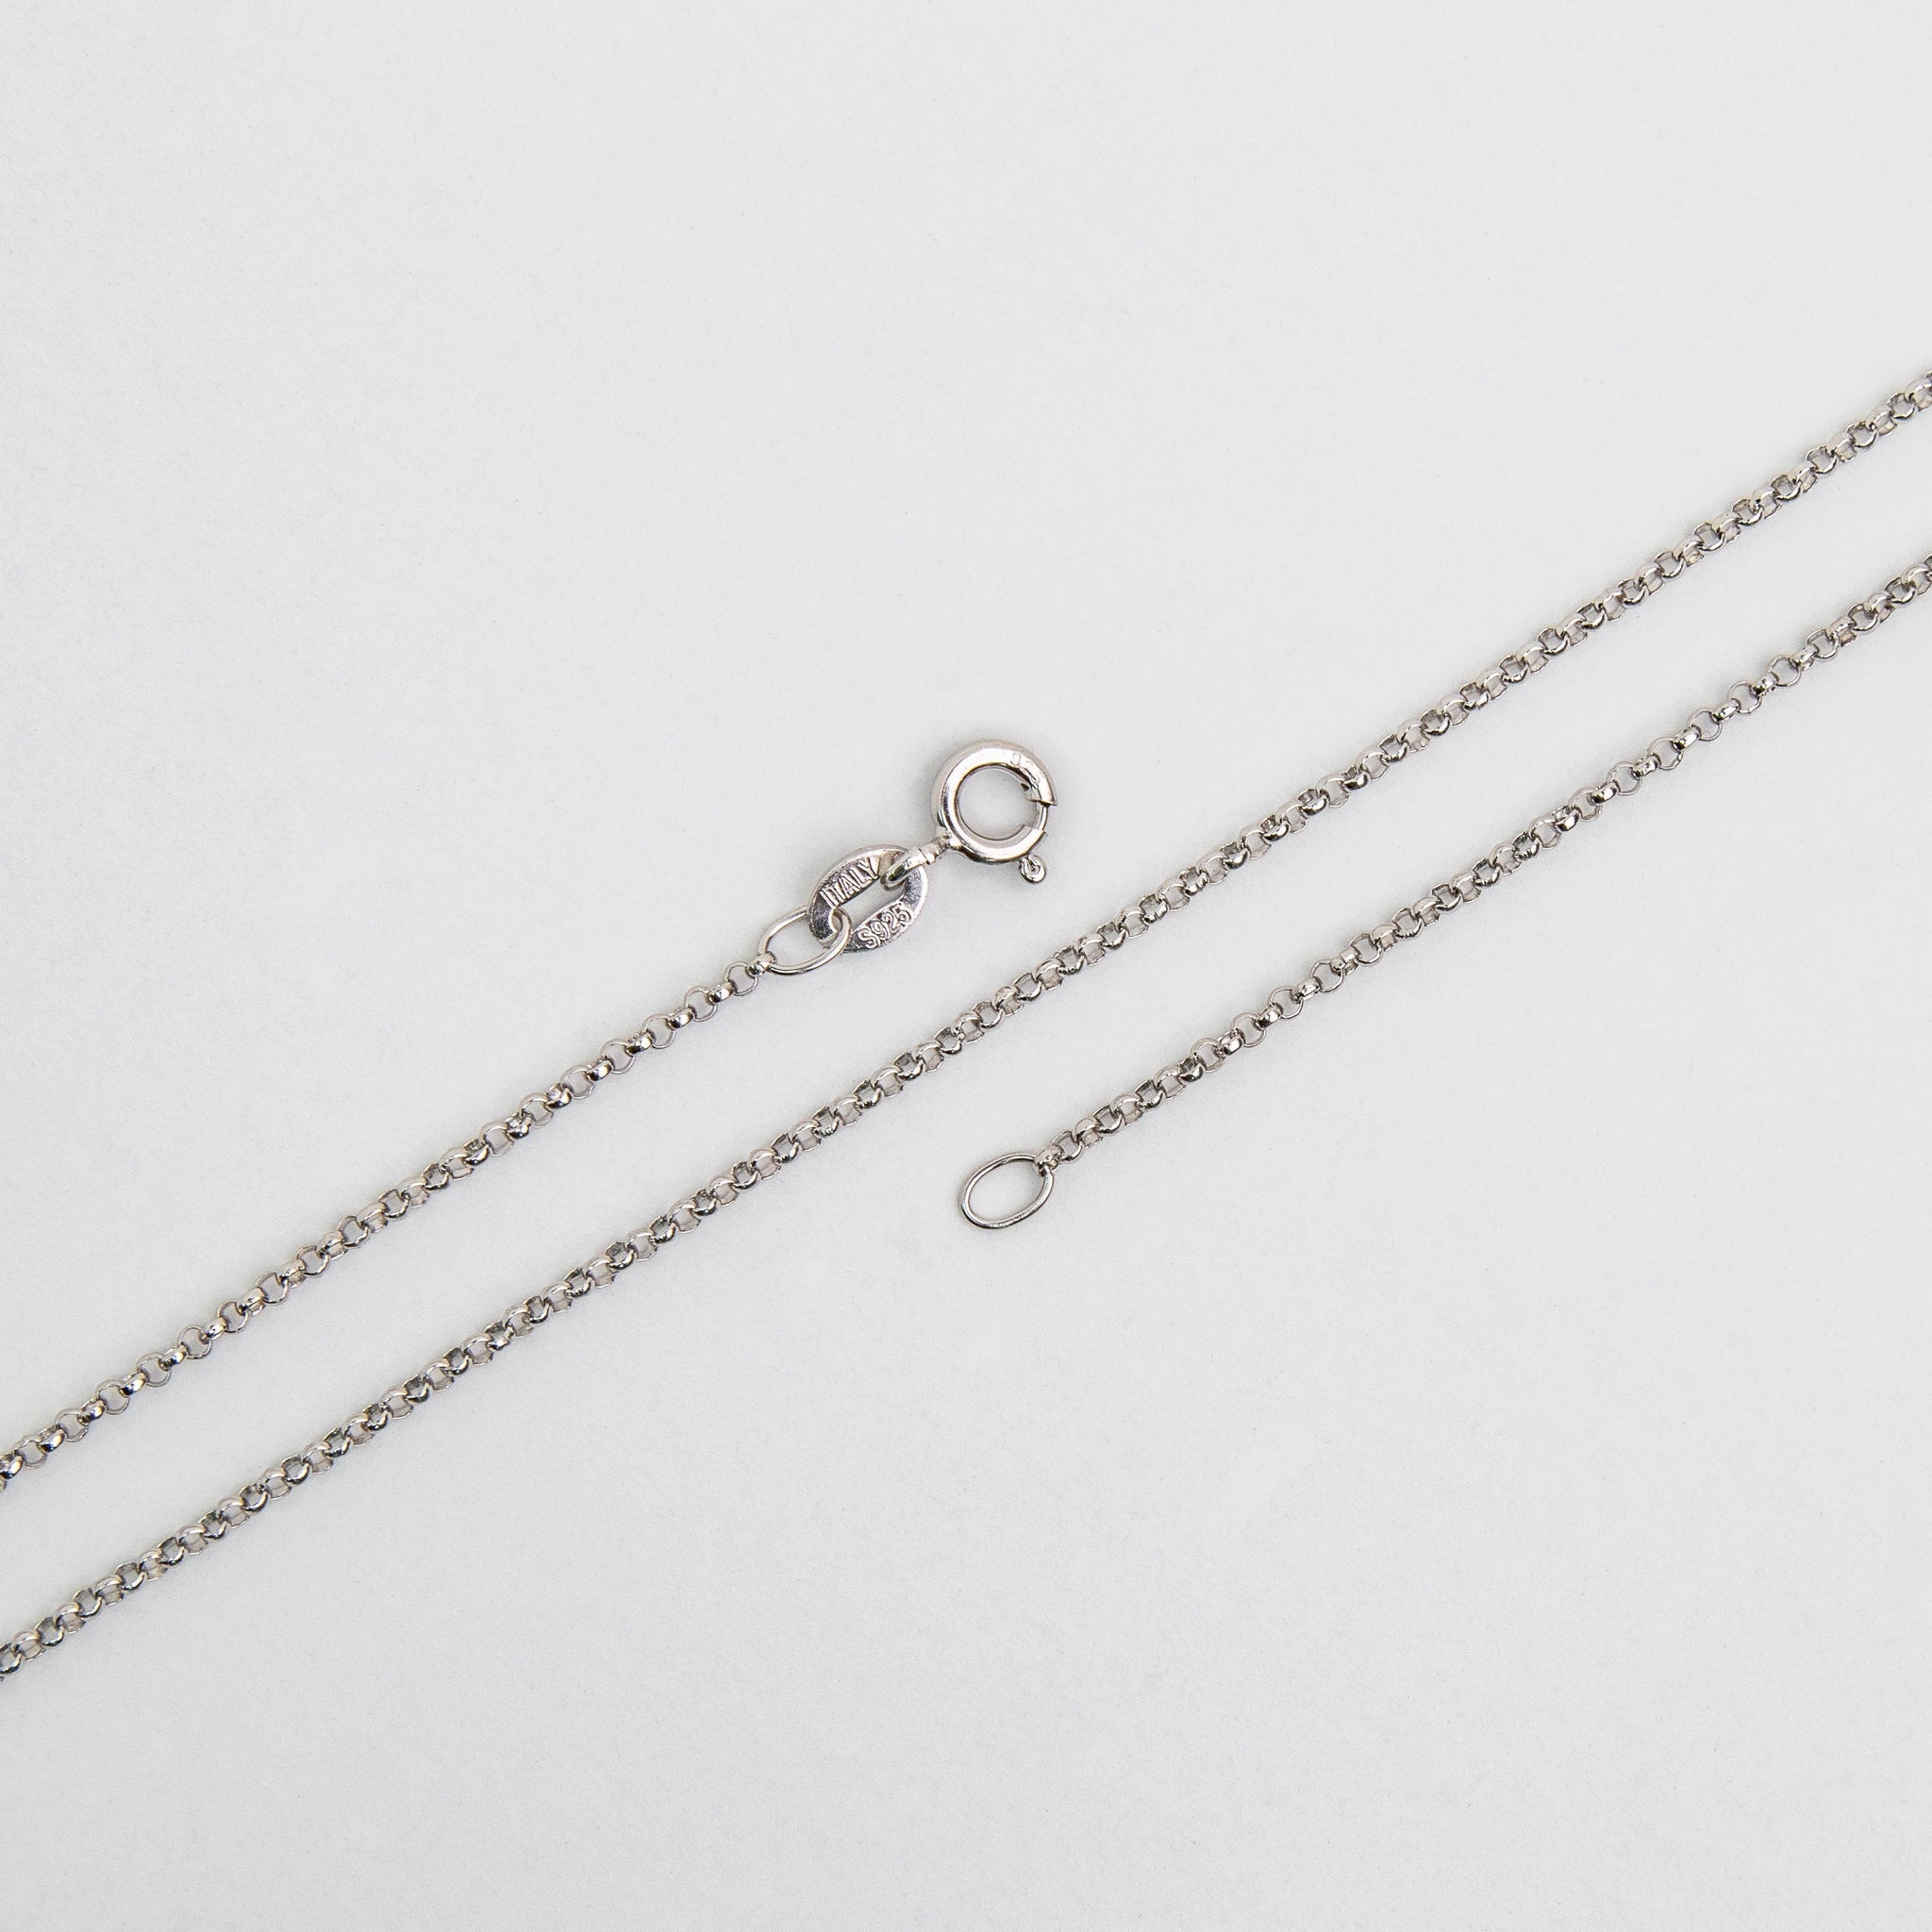 Necklace 16 inch N3ST 1.50mm Rolo Chain Sterling Silver Necklace With Spring Ring Clasp Available in 3 Sizes Made in Italy .925 Sterling Silver 1.50mm Rolo Chain .925 Sterling Silver Necklace With Spring Ring Clasp  N3ST16